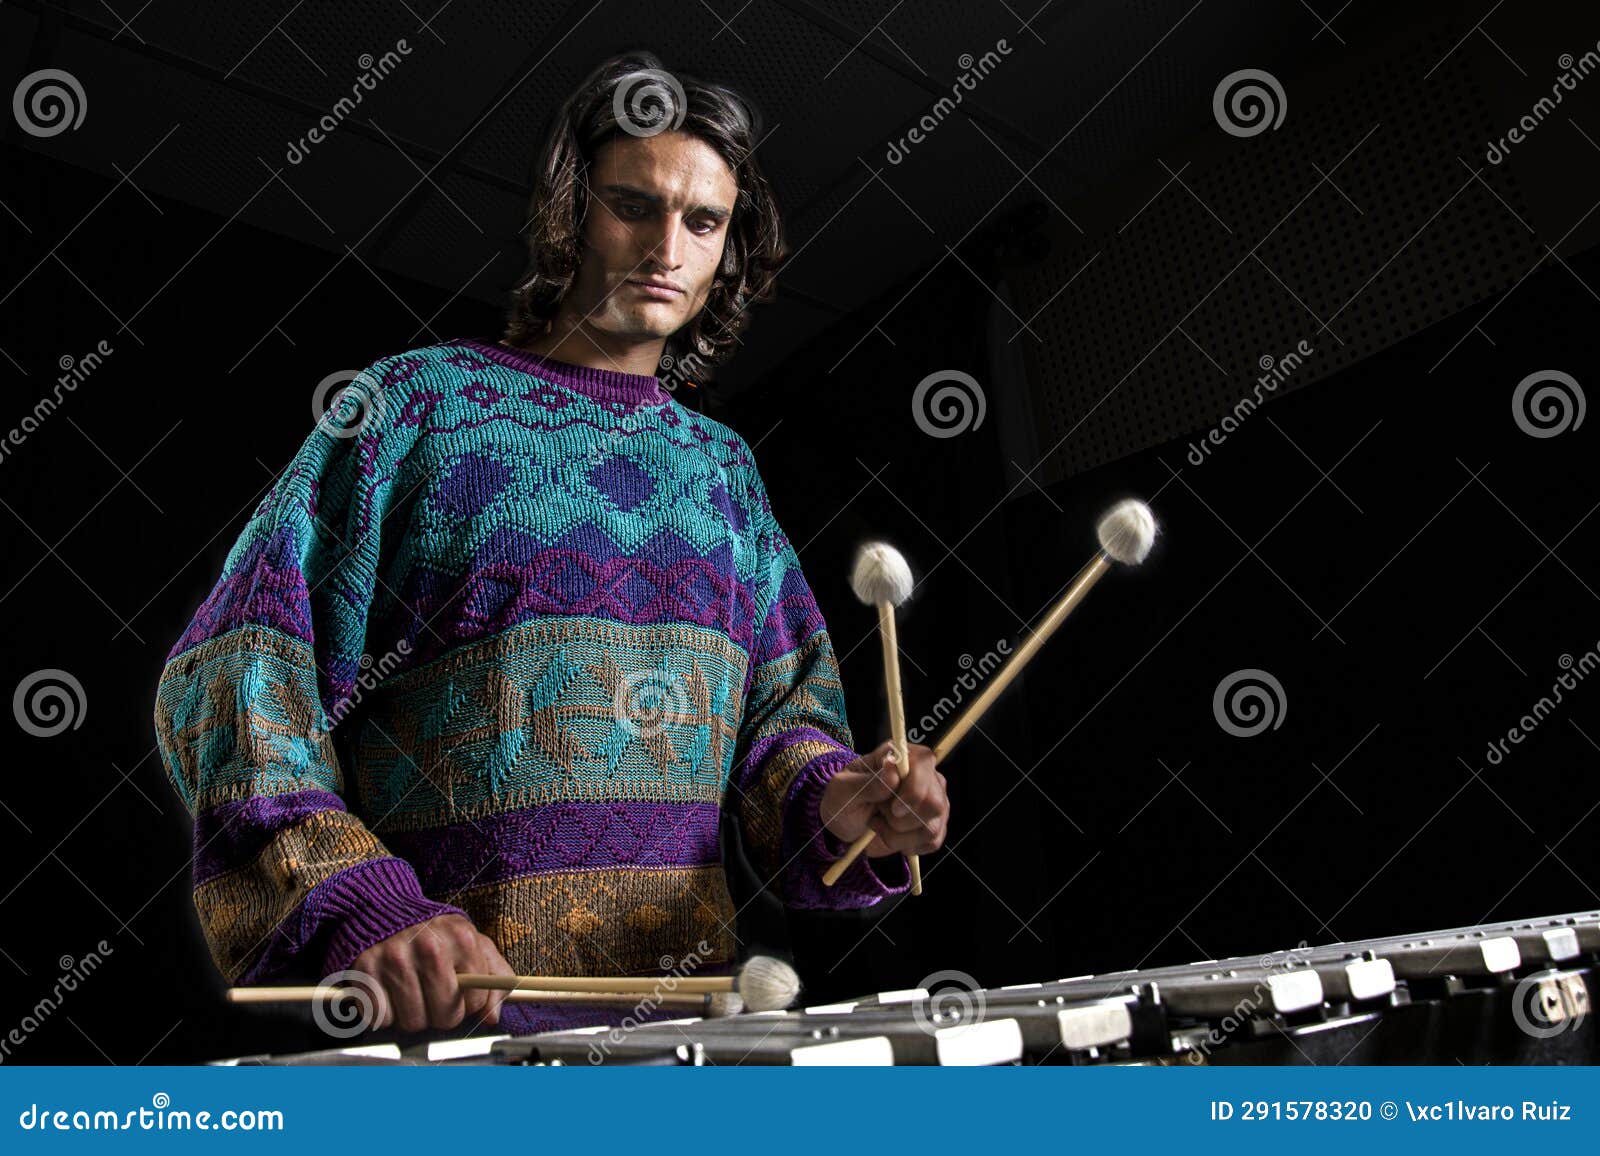 young jazz musician playing the vibraphone in his private rehearsal room. black background.